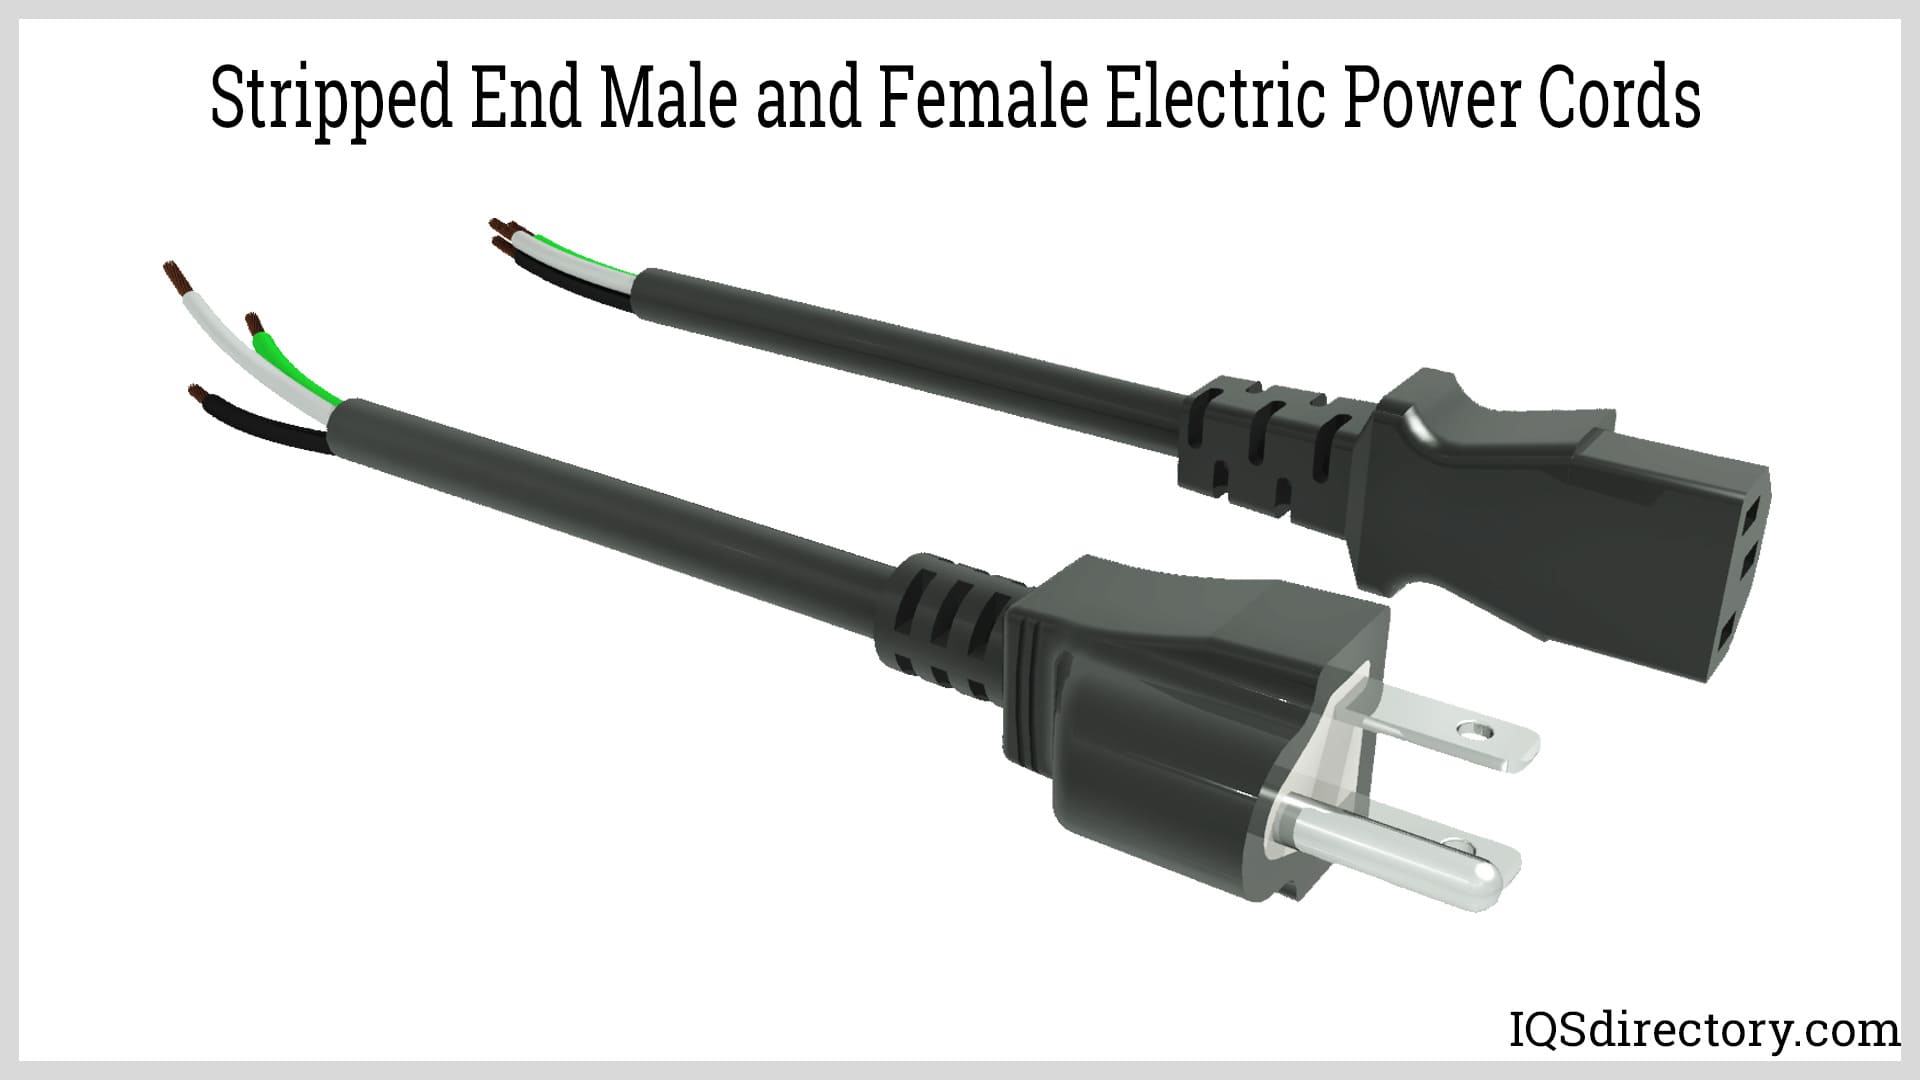 Stripped End Male and Female Electric Power Cords